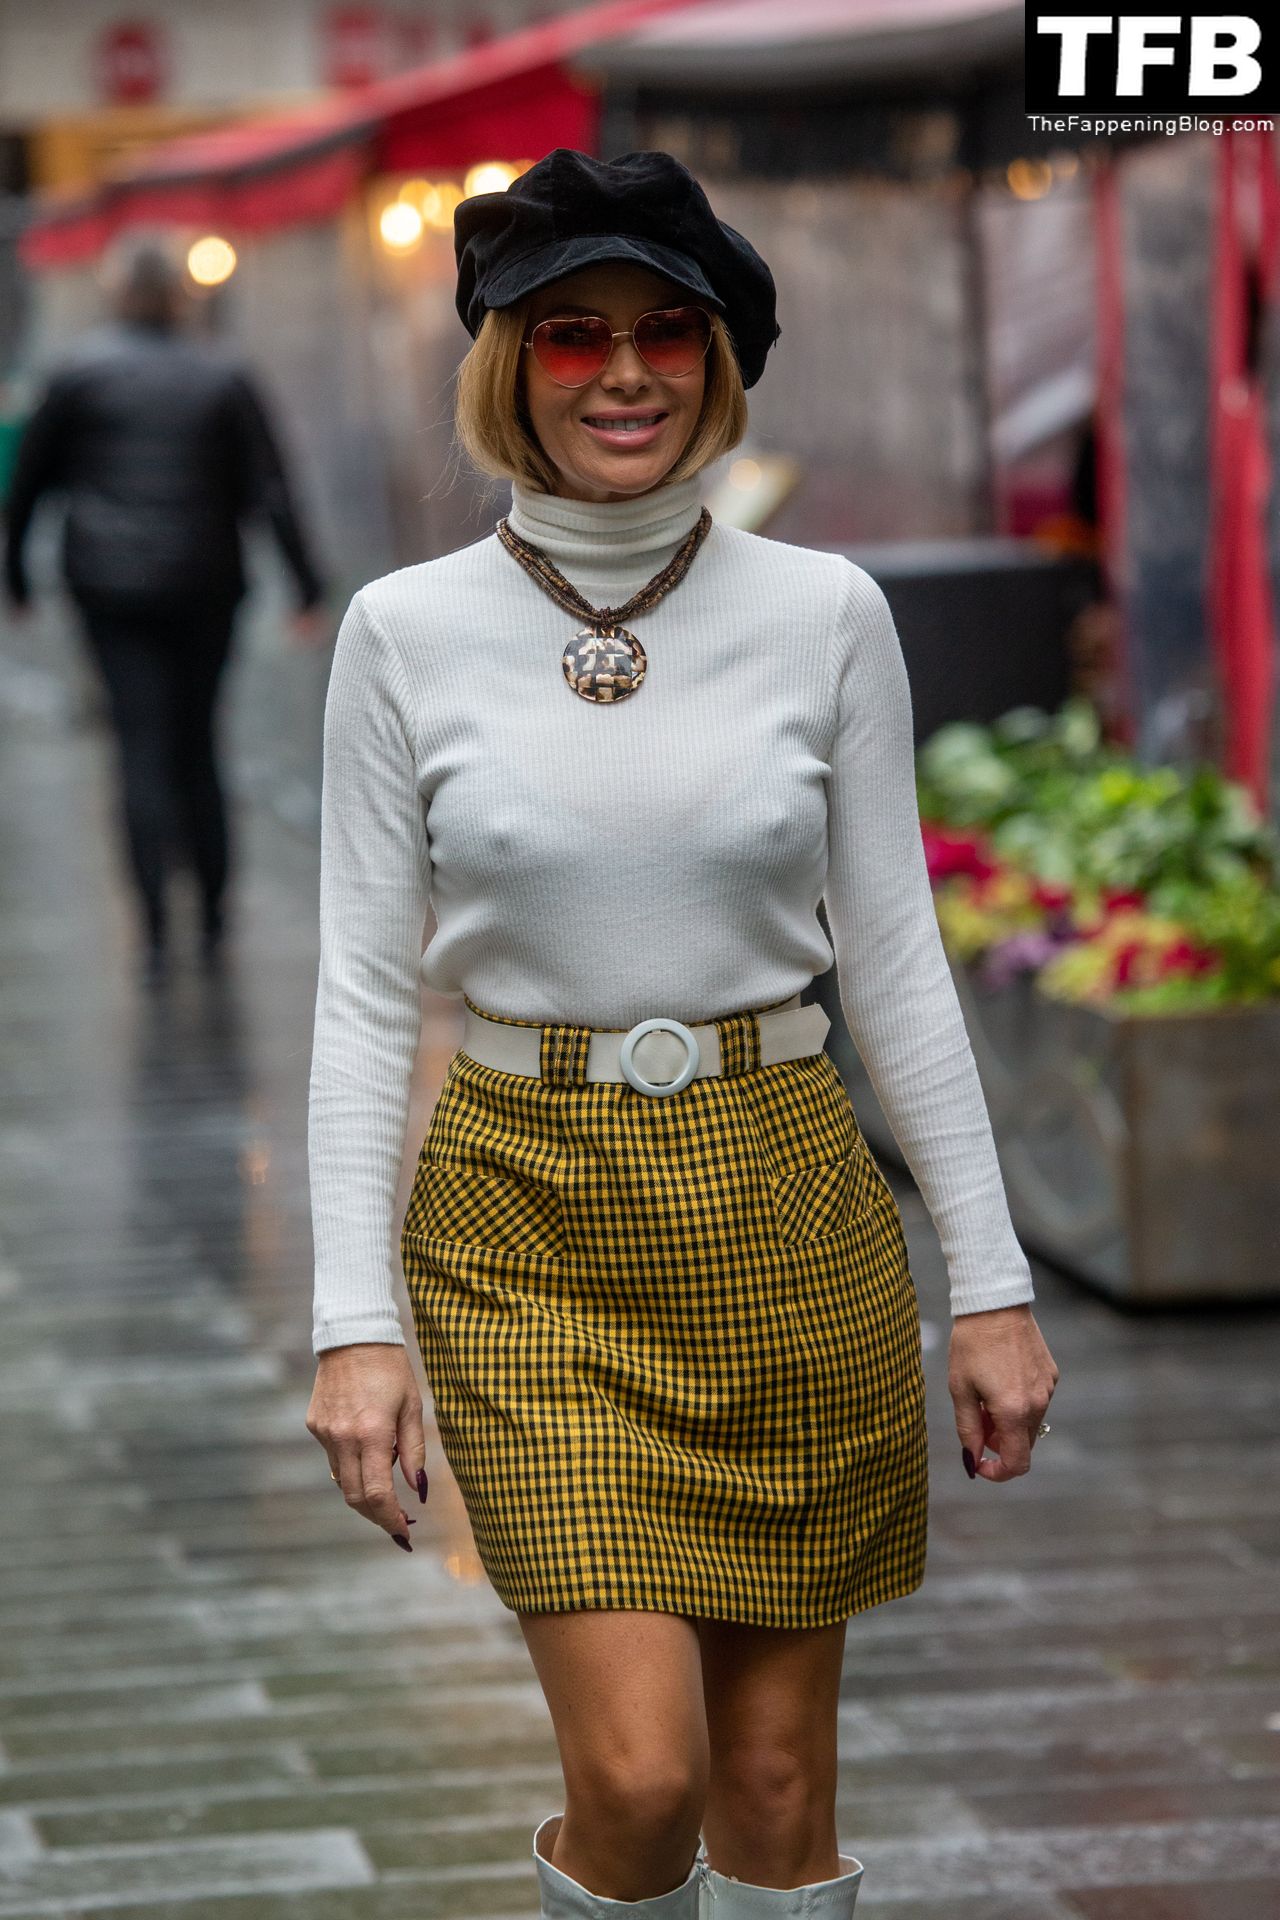 Amanda Holden Sexy The Fappening Blog 9 - Amanda Holden Shows Off Her Pokies Leaving the Global Radio Studios in London (46 Photos)